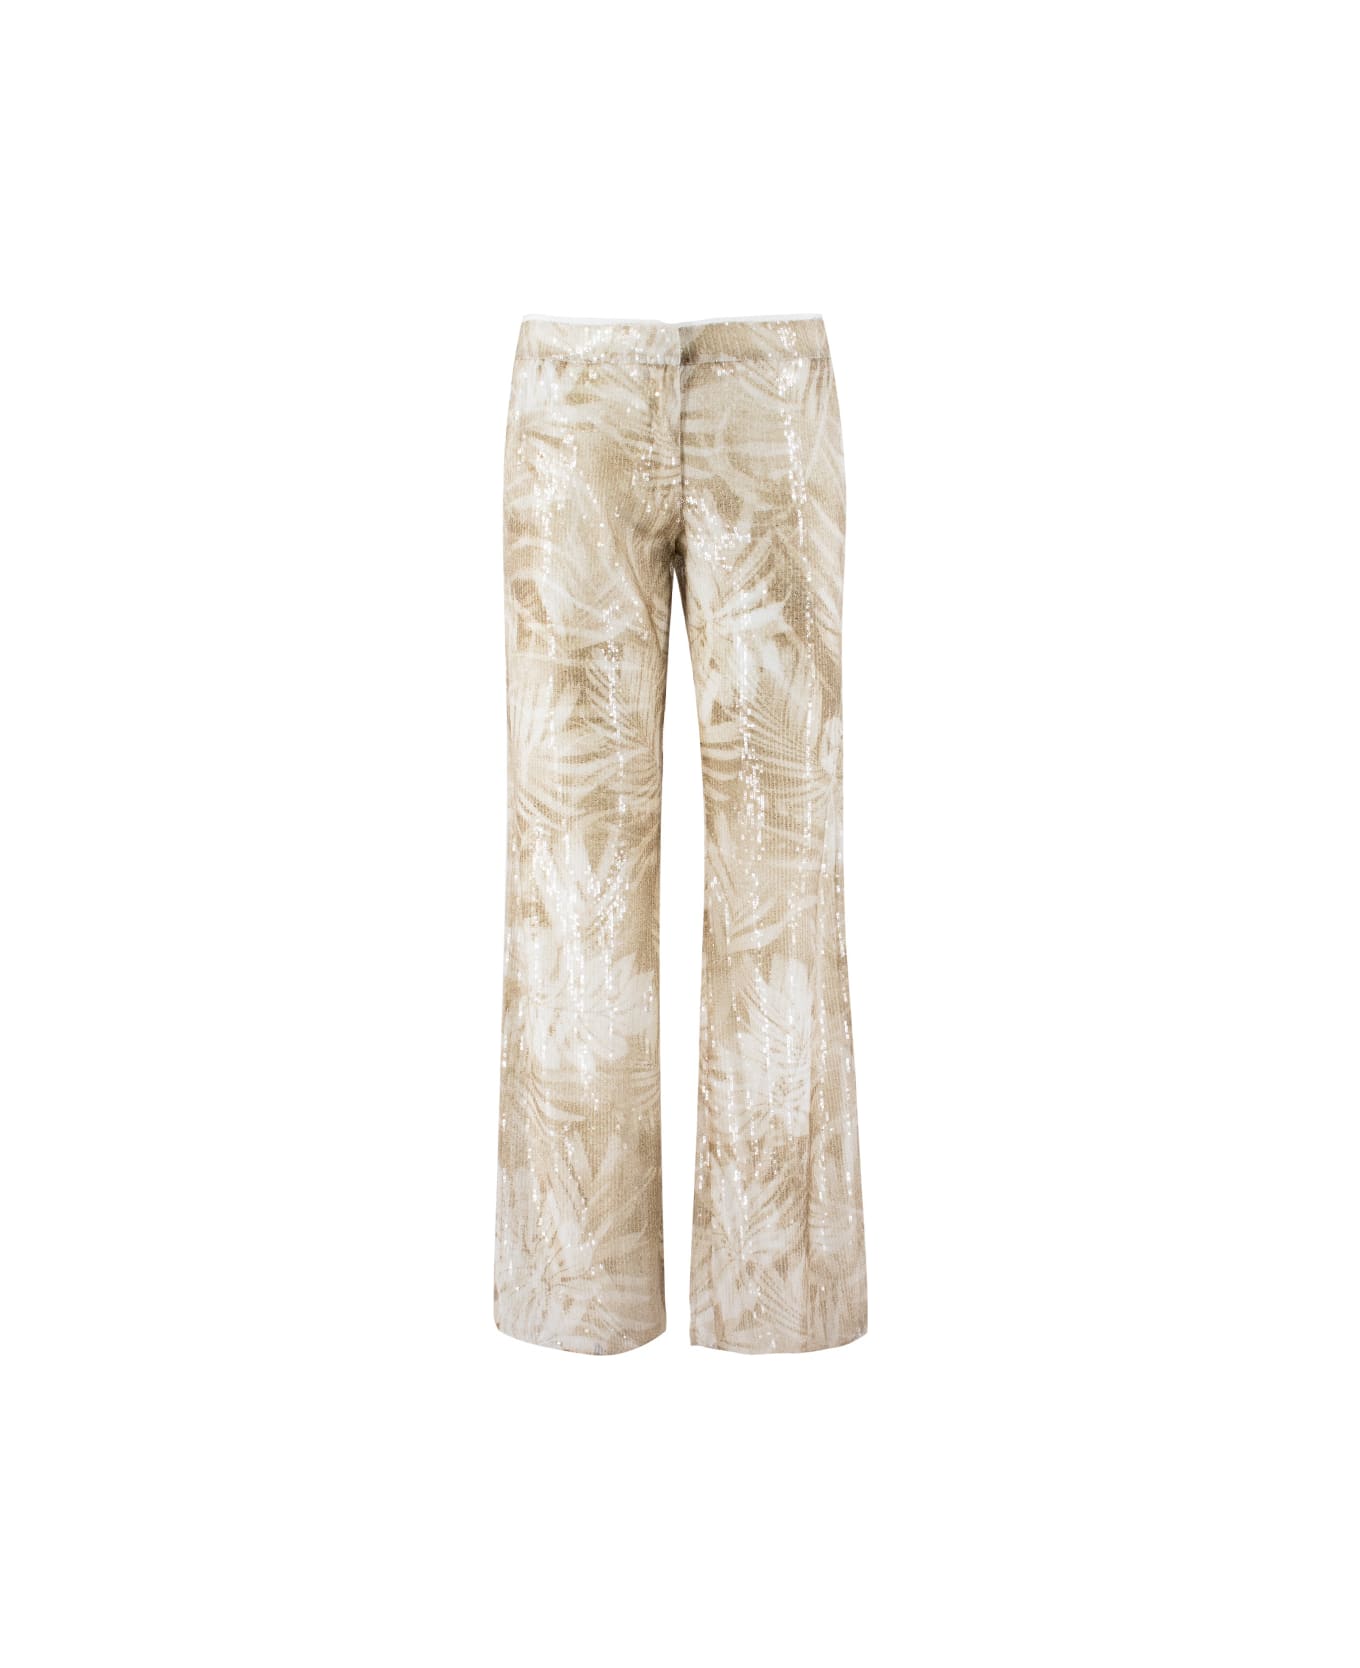 Ermanno Firenze Trousers - BEIGE/COLONIALE ボトムス